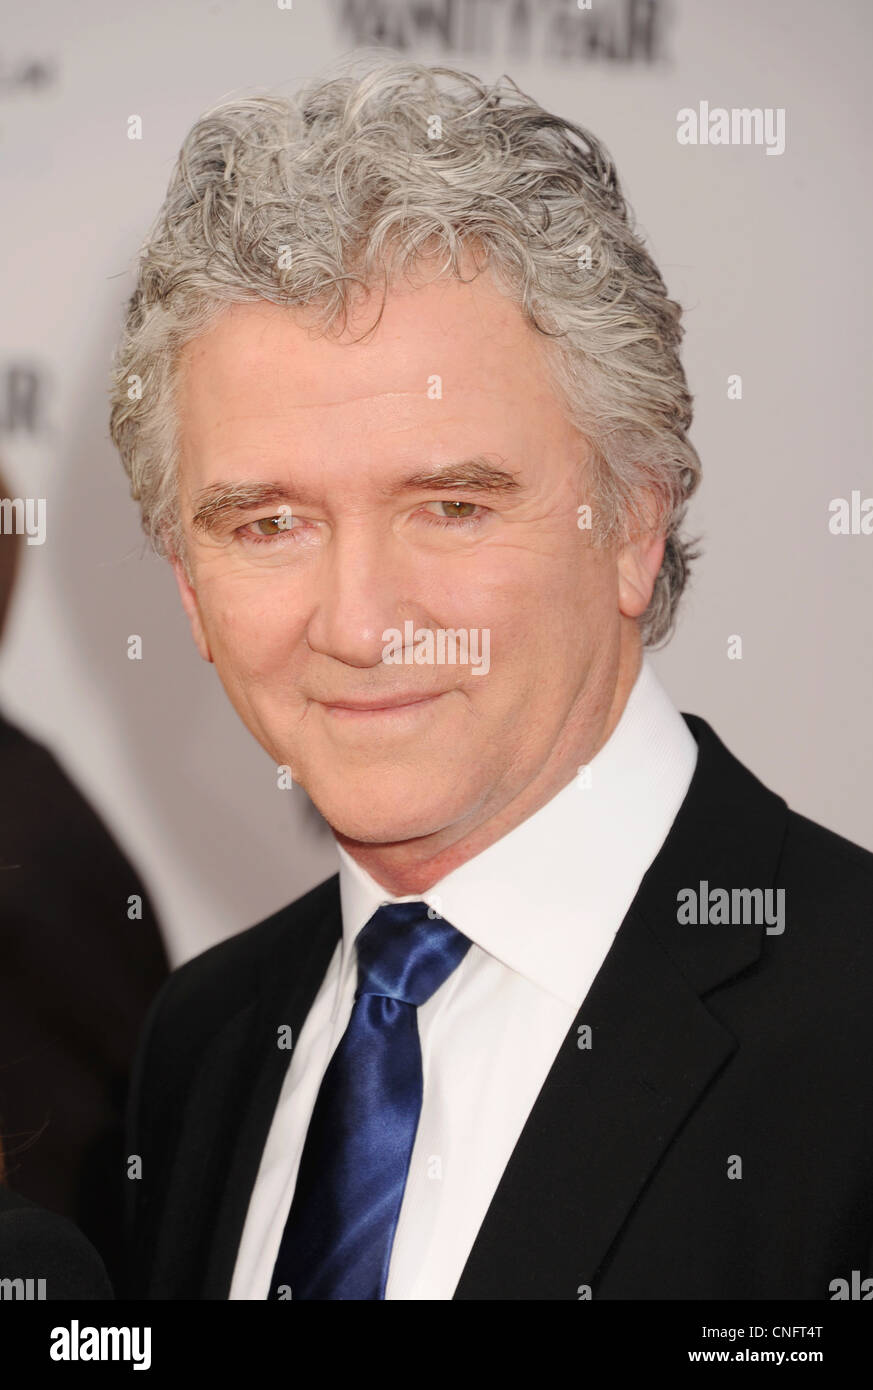 PATRICK DUFFY US film and TV actor in Photo Stock Photo - Alamy